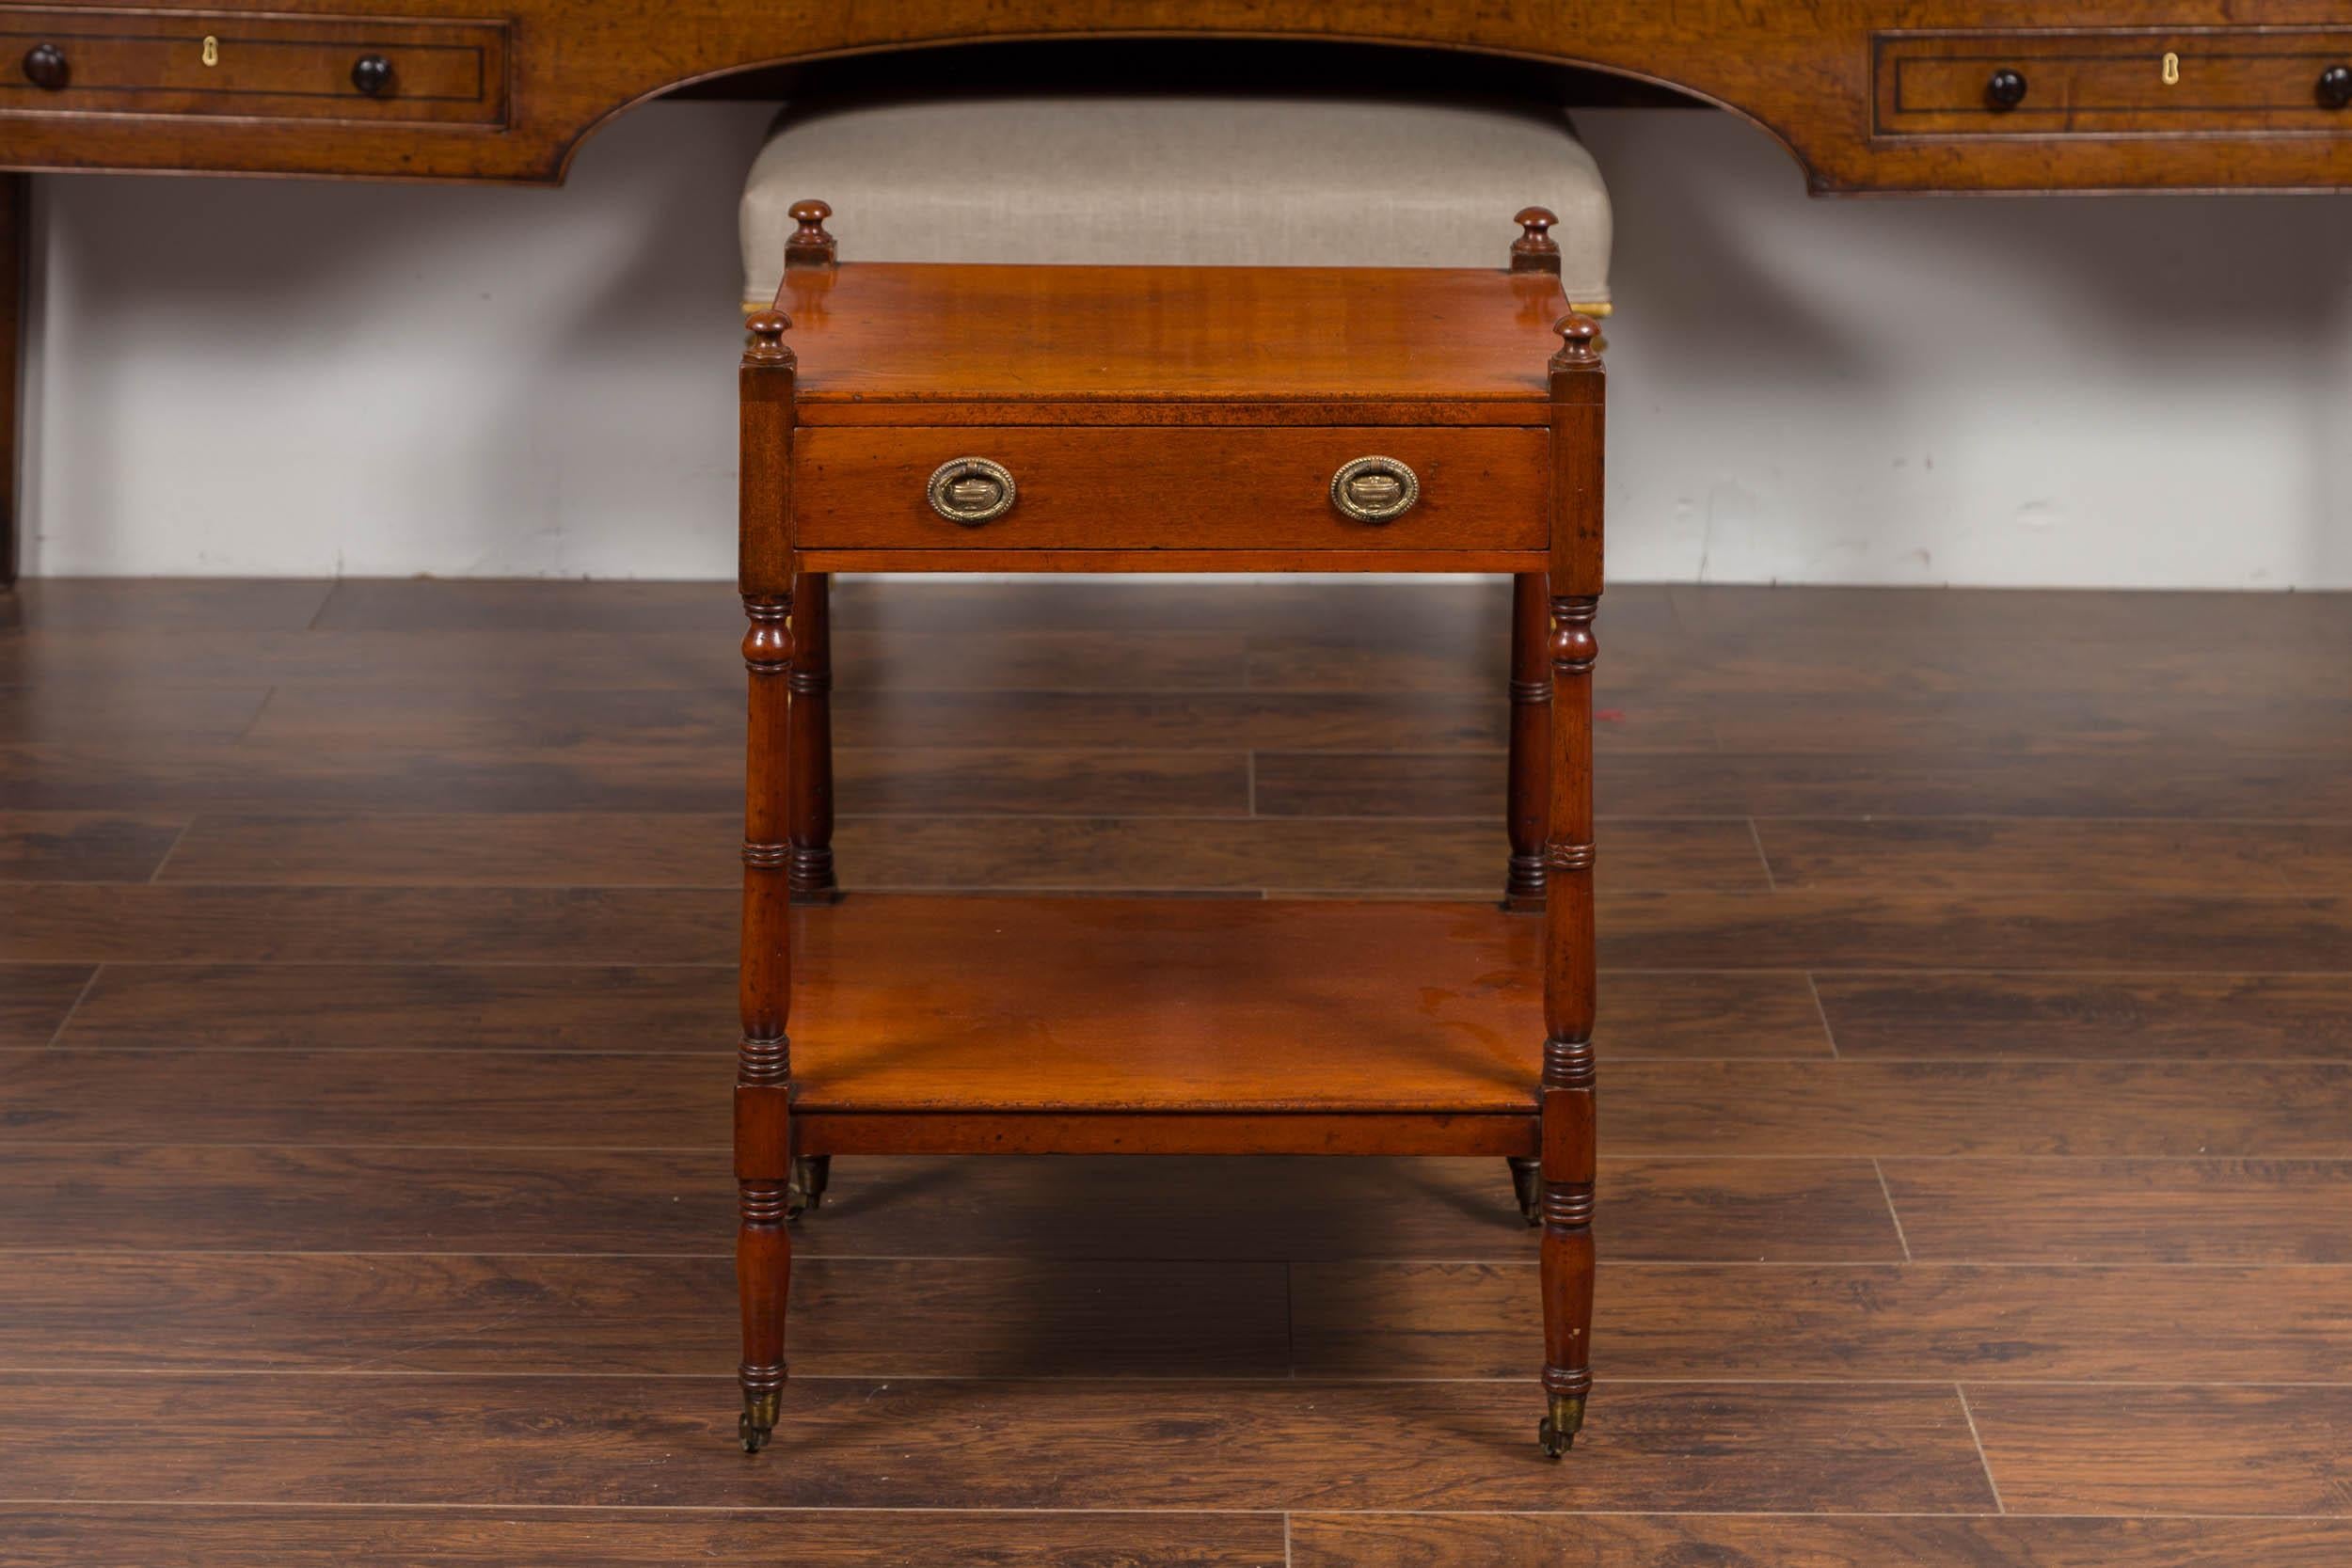 An English mahogany trolley from the late 19th century, with single drawer, lower shelf and casters. Born in England during the last quarter of the 19th century, this tiered trolley features a rectangular top resting on a single drawer fitted with